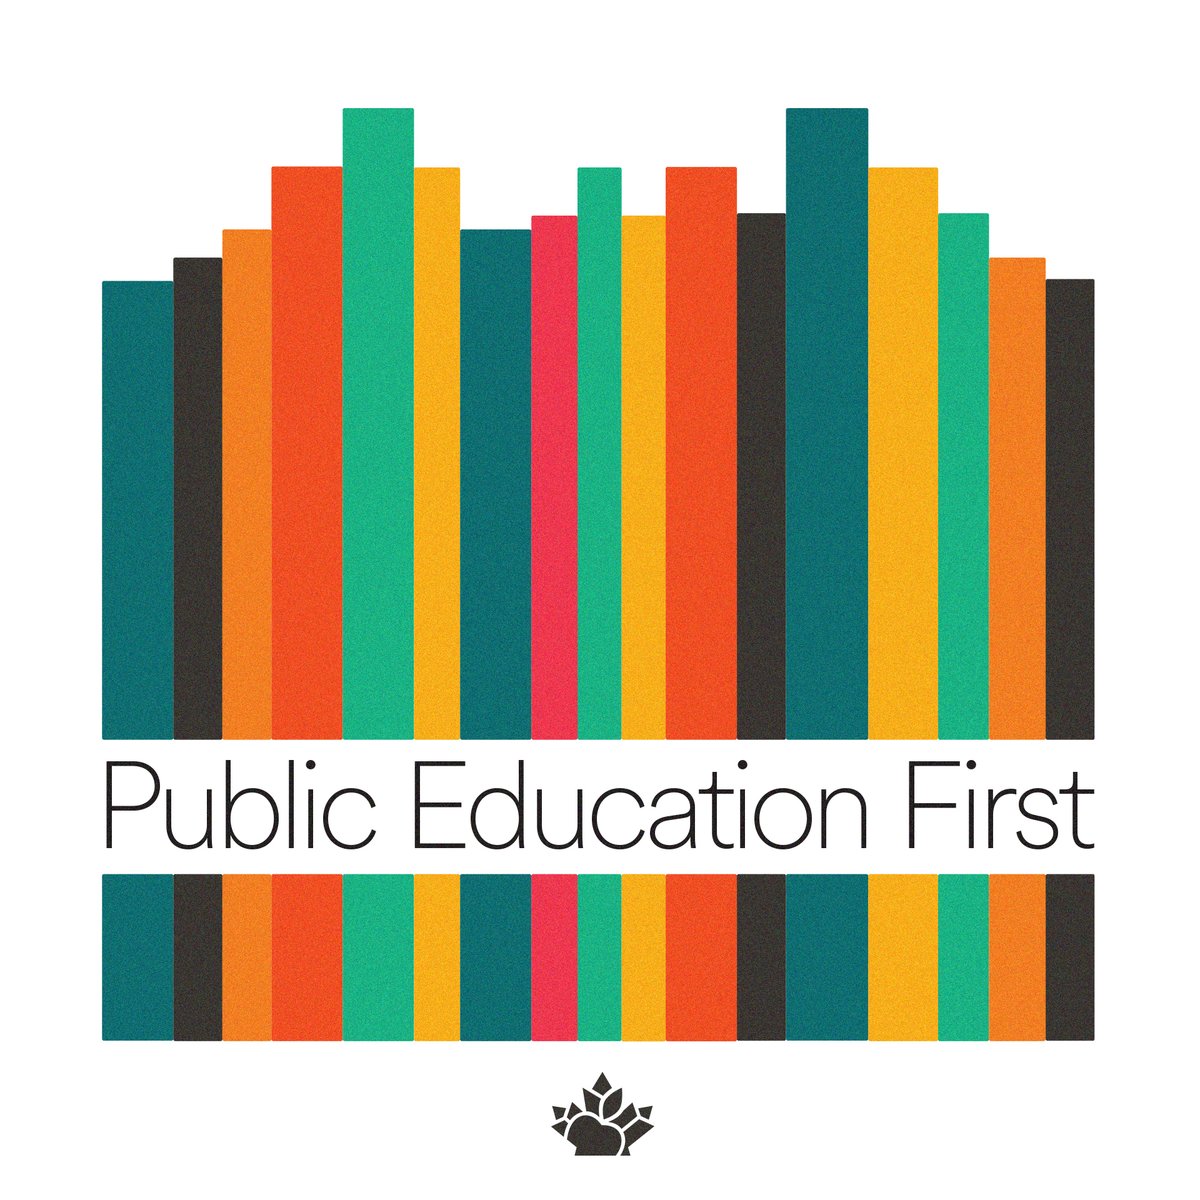 Education support personnel play a vital role in: ✔️fostering a positive learning environment ✔️running efficient public education systems ✔️providing quality public education #PublicEducationFirst 🖍️ #ESPDay